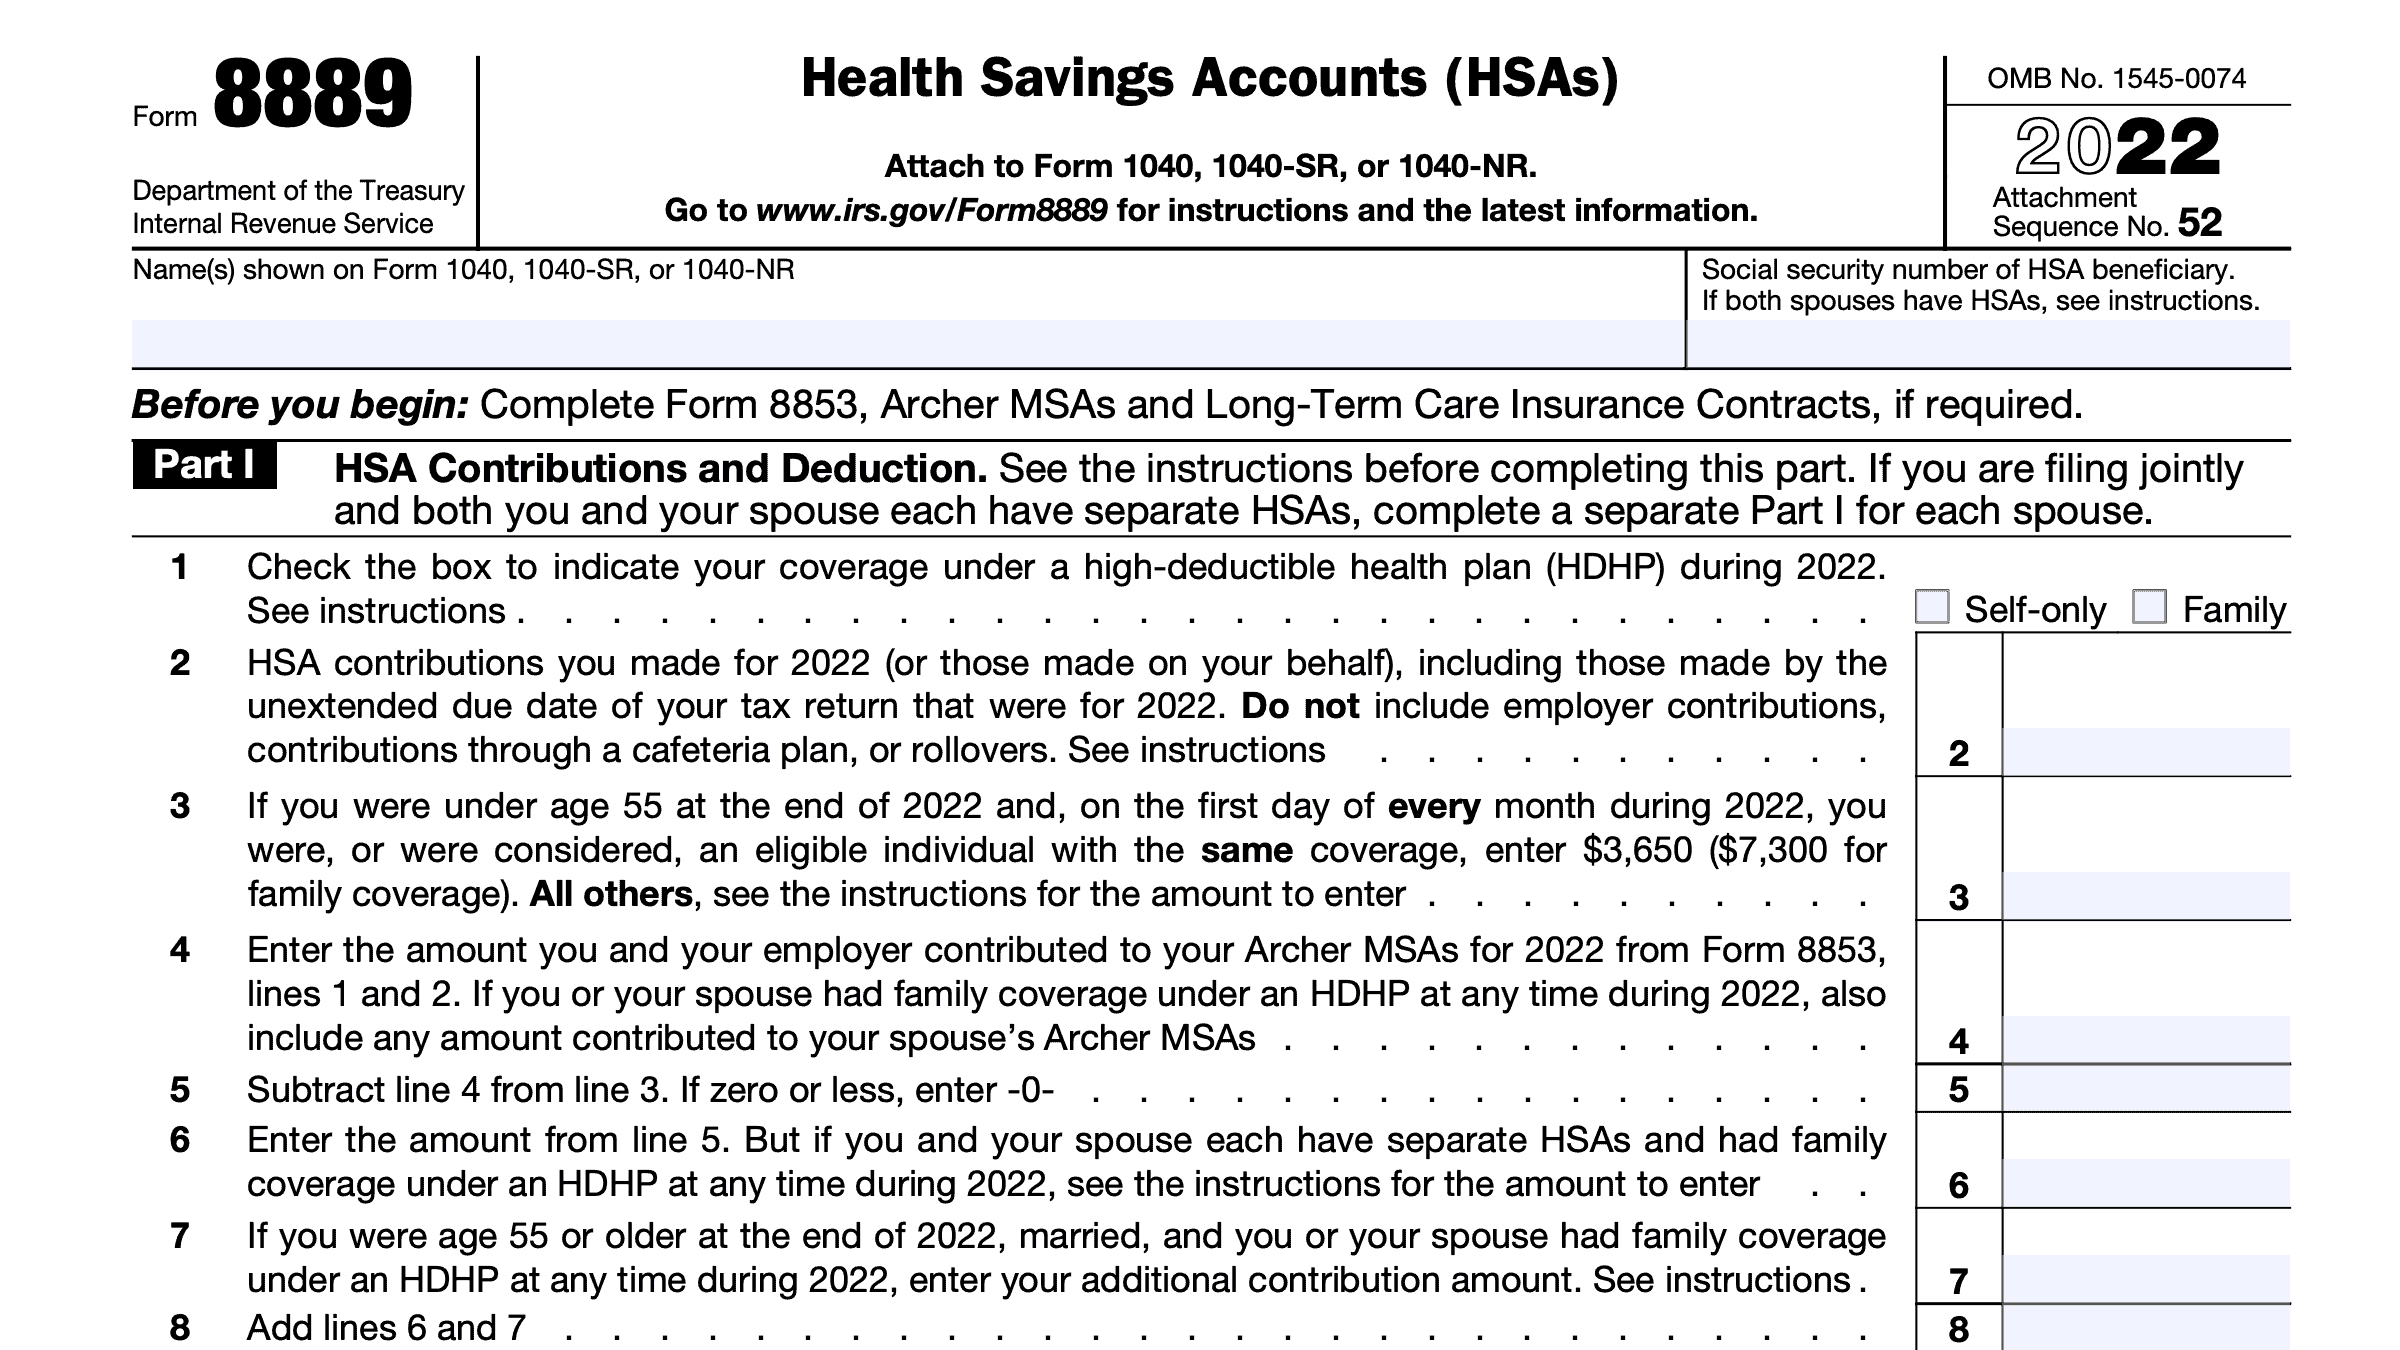 IRS Form 8889 Instructions A Guide to Health Savings Accounts